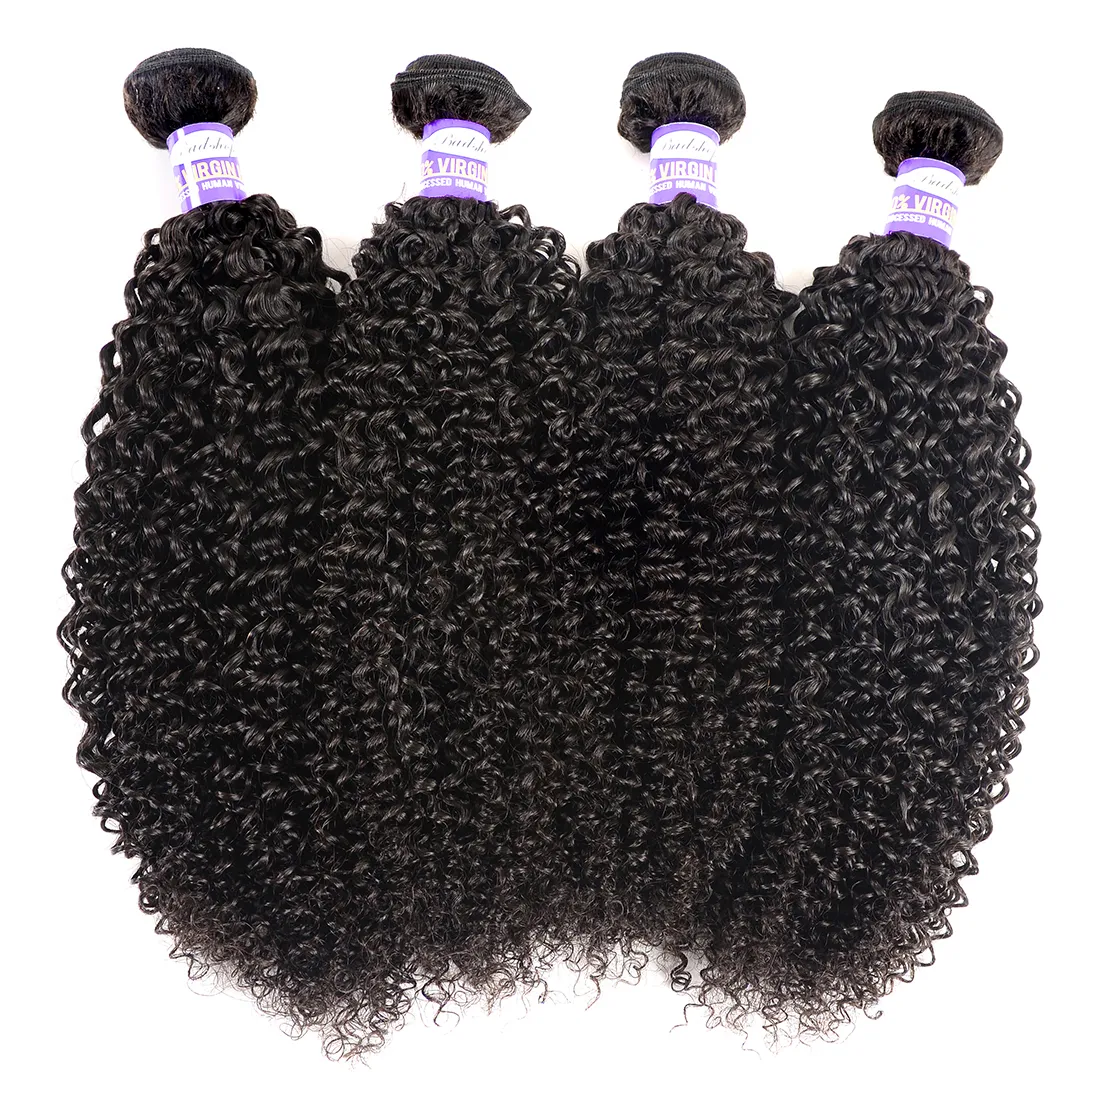 9A Brazilian Deep Wave 3 Bundles with Lace Closure Frontal Brazilian Kinky Curly Water Body Loose Wave Straight Weave Human Hair E6733765